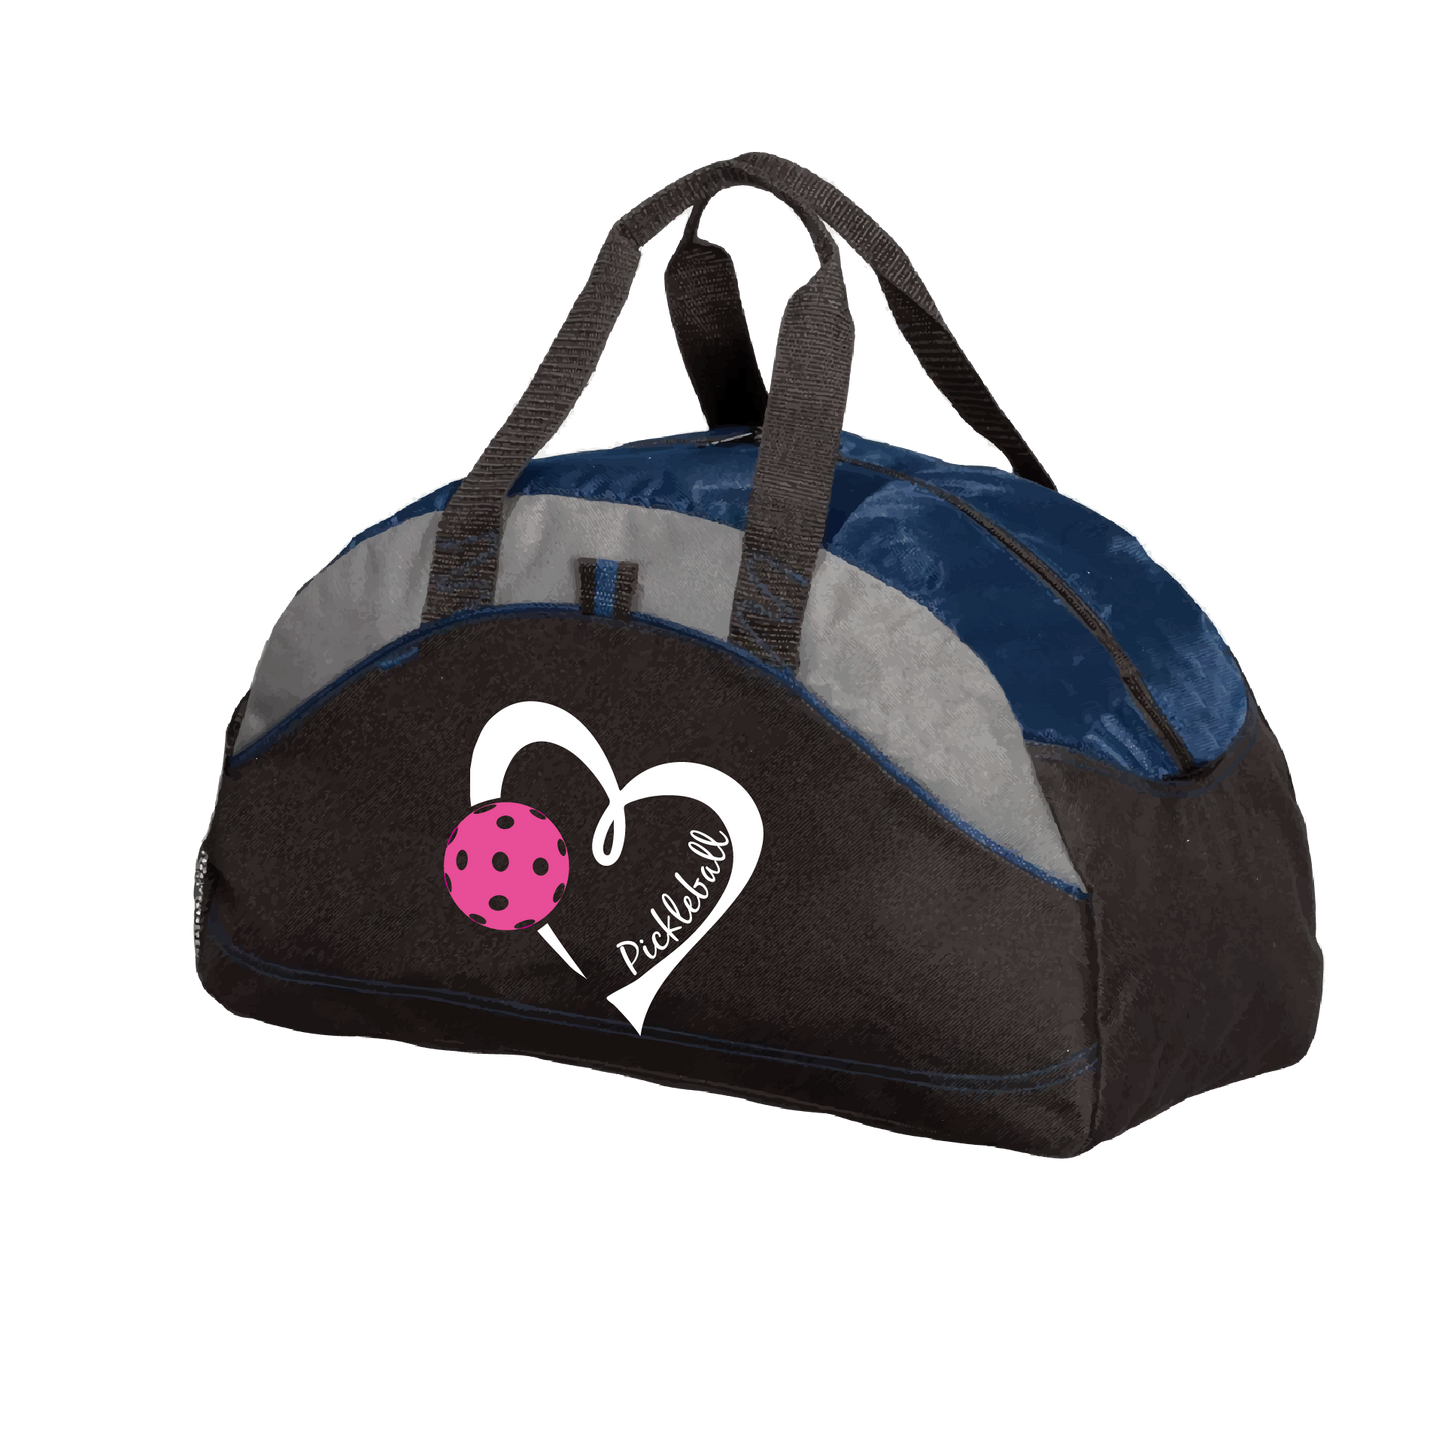 Pickleball Duffel Bag Design: Heart with Pickleball  Carry your gear in comfort and style. This fun pickleball duffel bag is the perfect accessory for all pickleball players needing to keep their gear in one place. This medium sized duffel tote is ideal for all your pickleball activities. The large center compartment allows for plenty of space and the mesh end pocket is perfect for holding a water bottle.